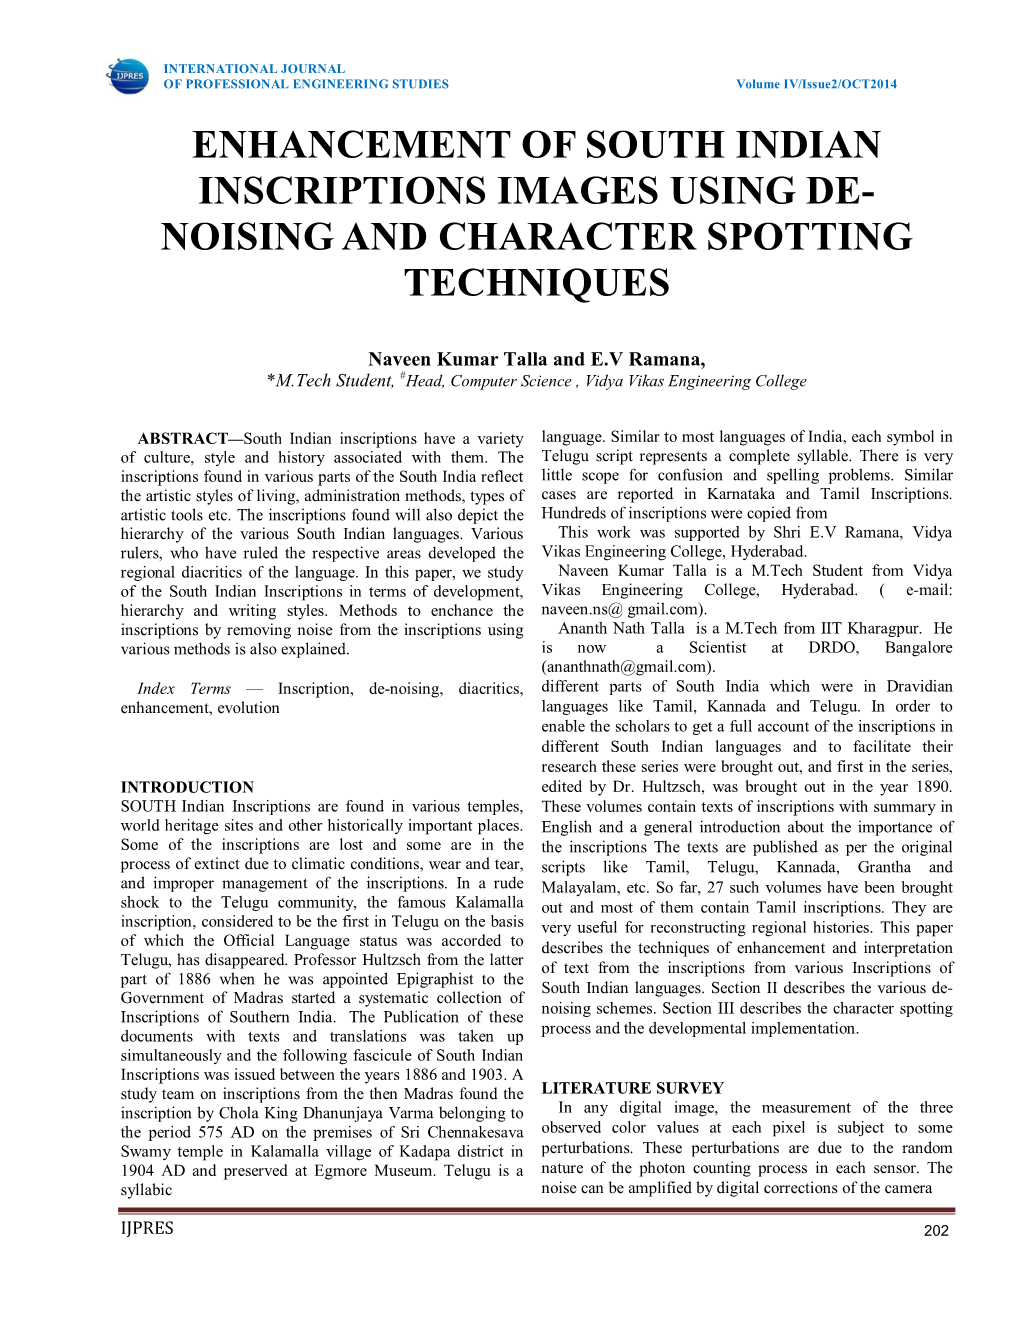 Enhancement of South Indian Inscriptions Images Using De- Noising and Character Spotting Techniques